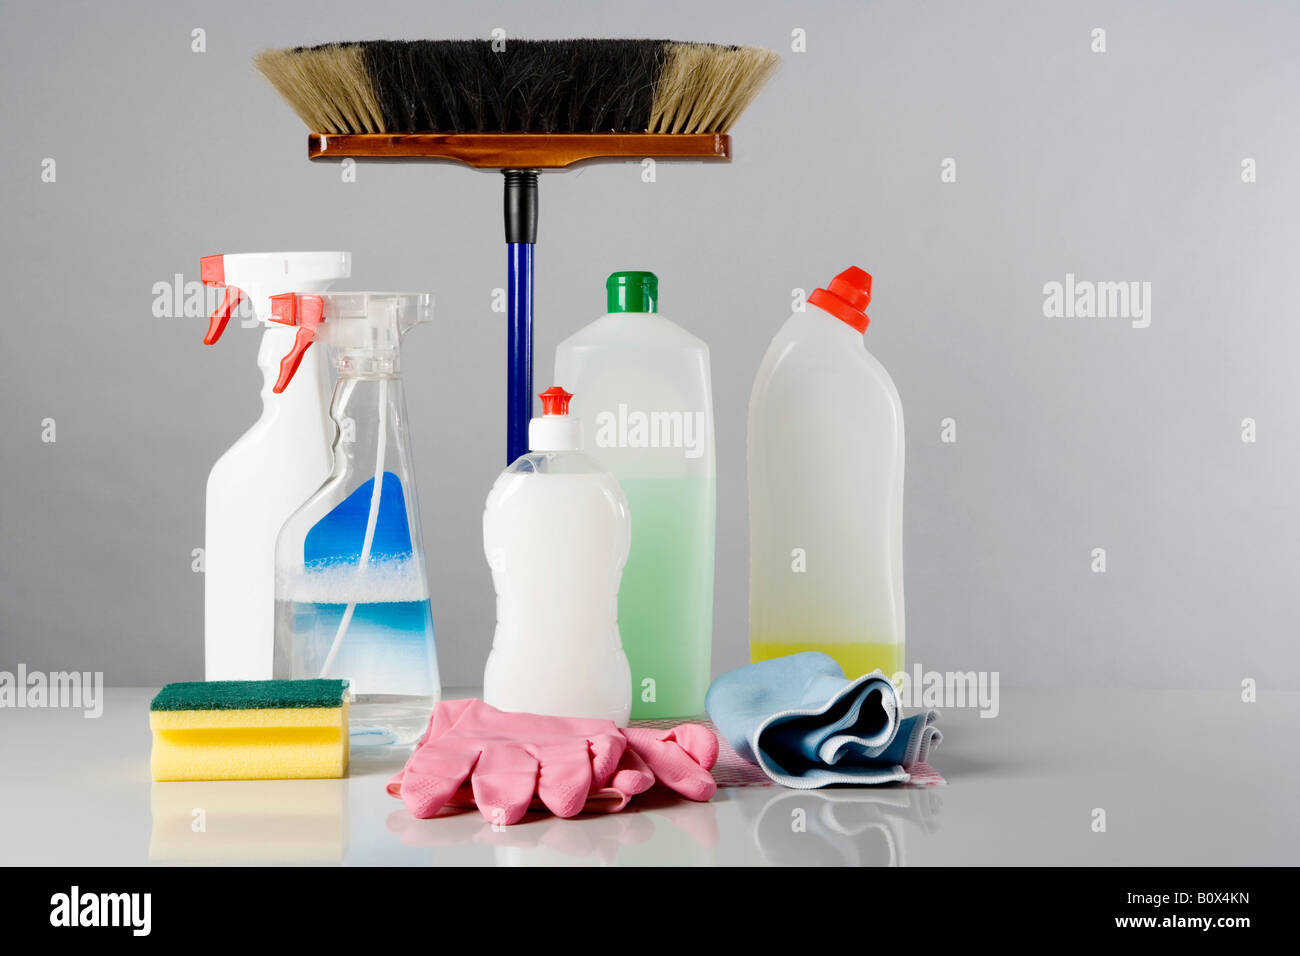 Cleaning Supplies Stock Photo